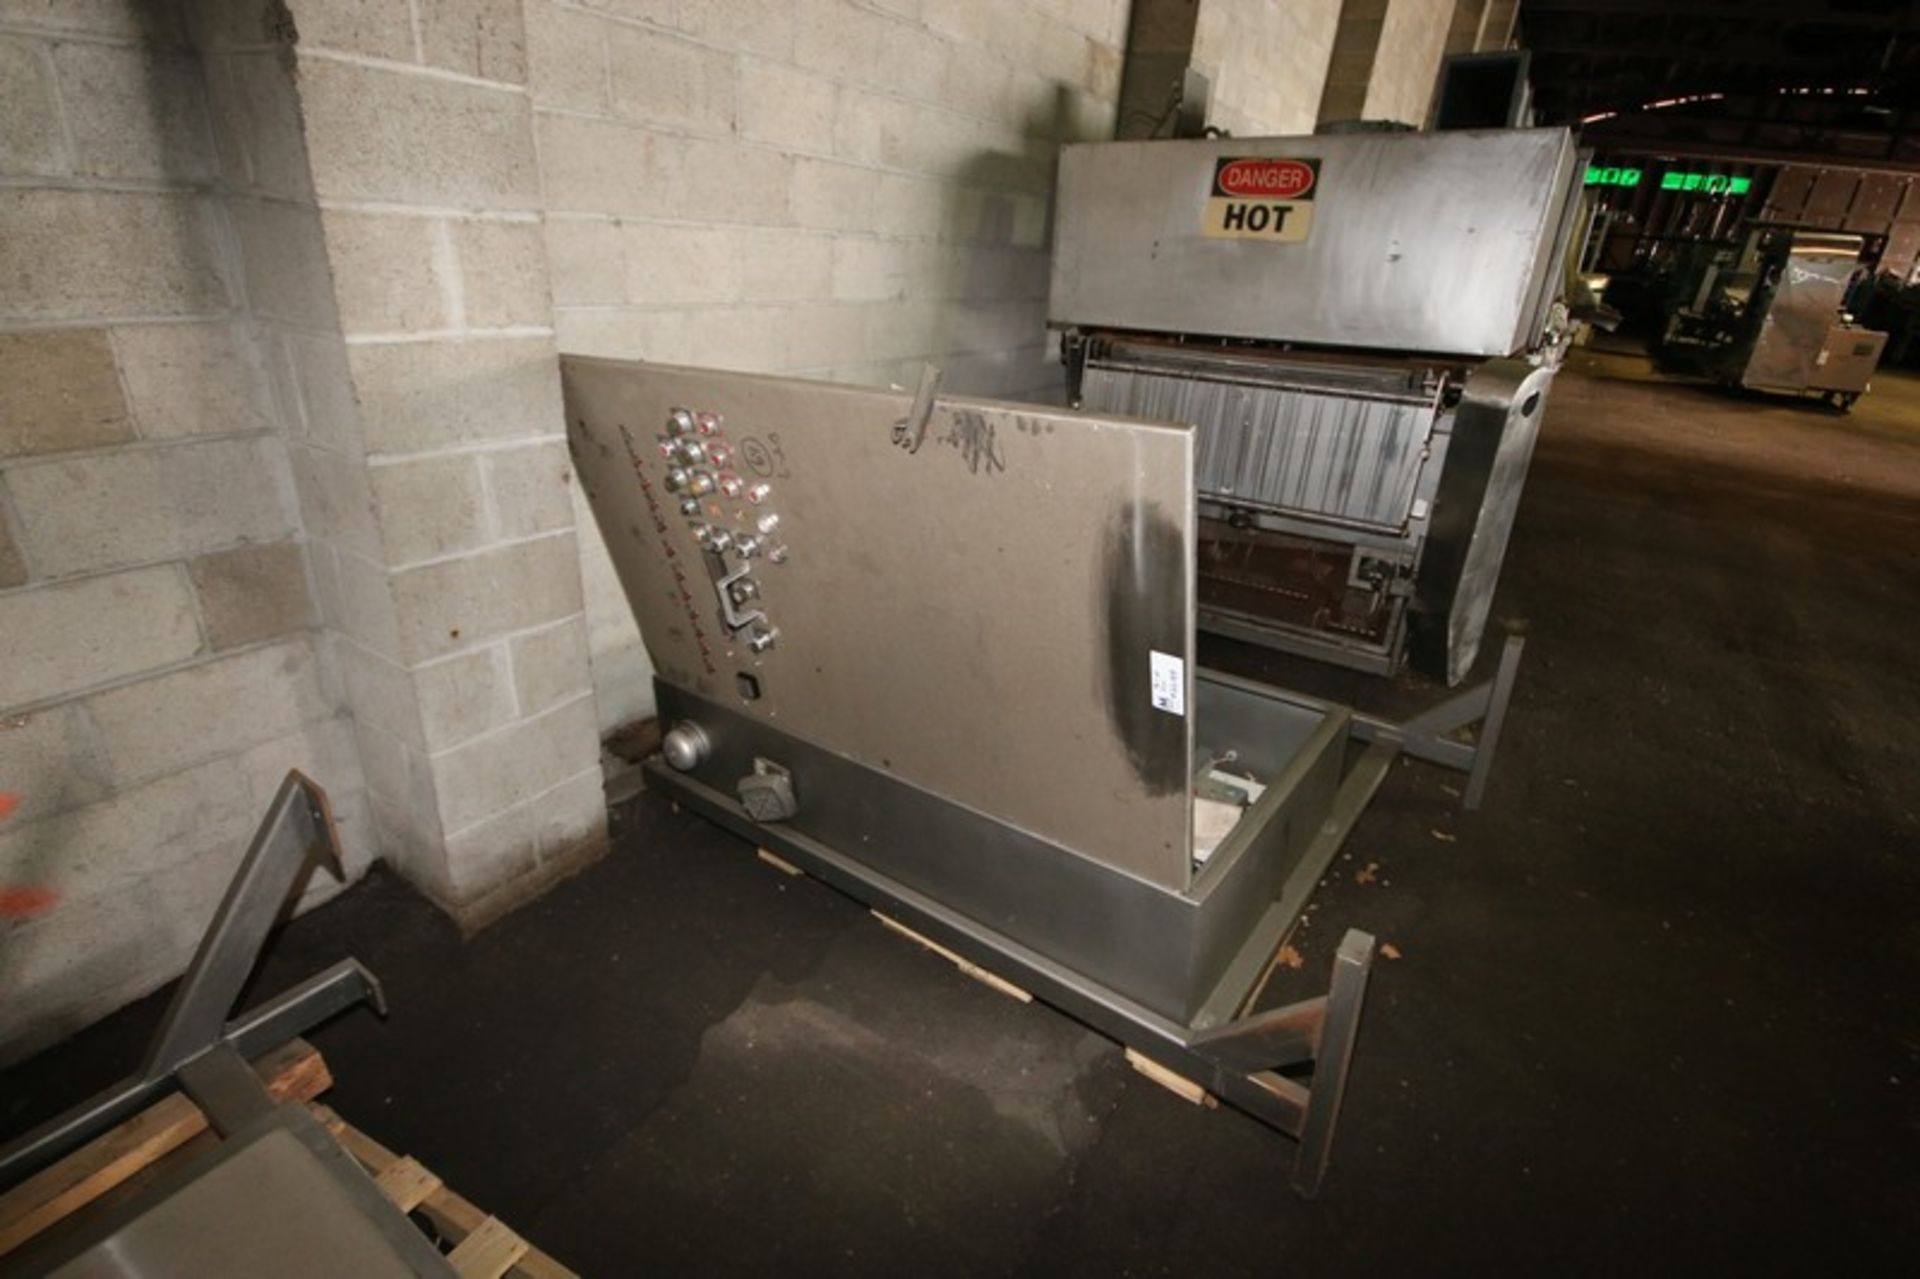 Higgs S/S Conveyor Bakery Fryer, Natural Gas Heated, 14' L x 54"W, Includes Exhaust Hood & Control - Image 11 of 11